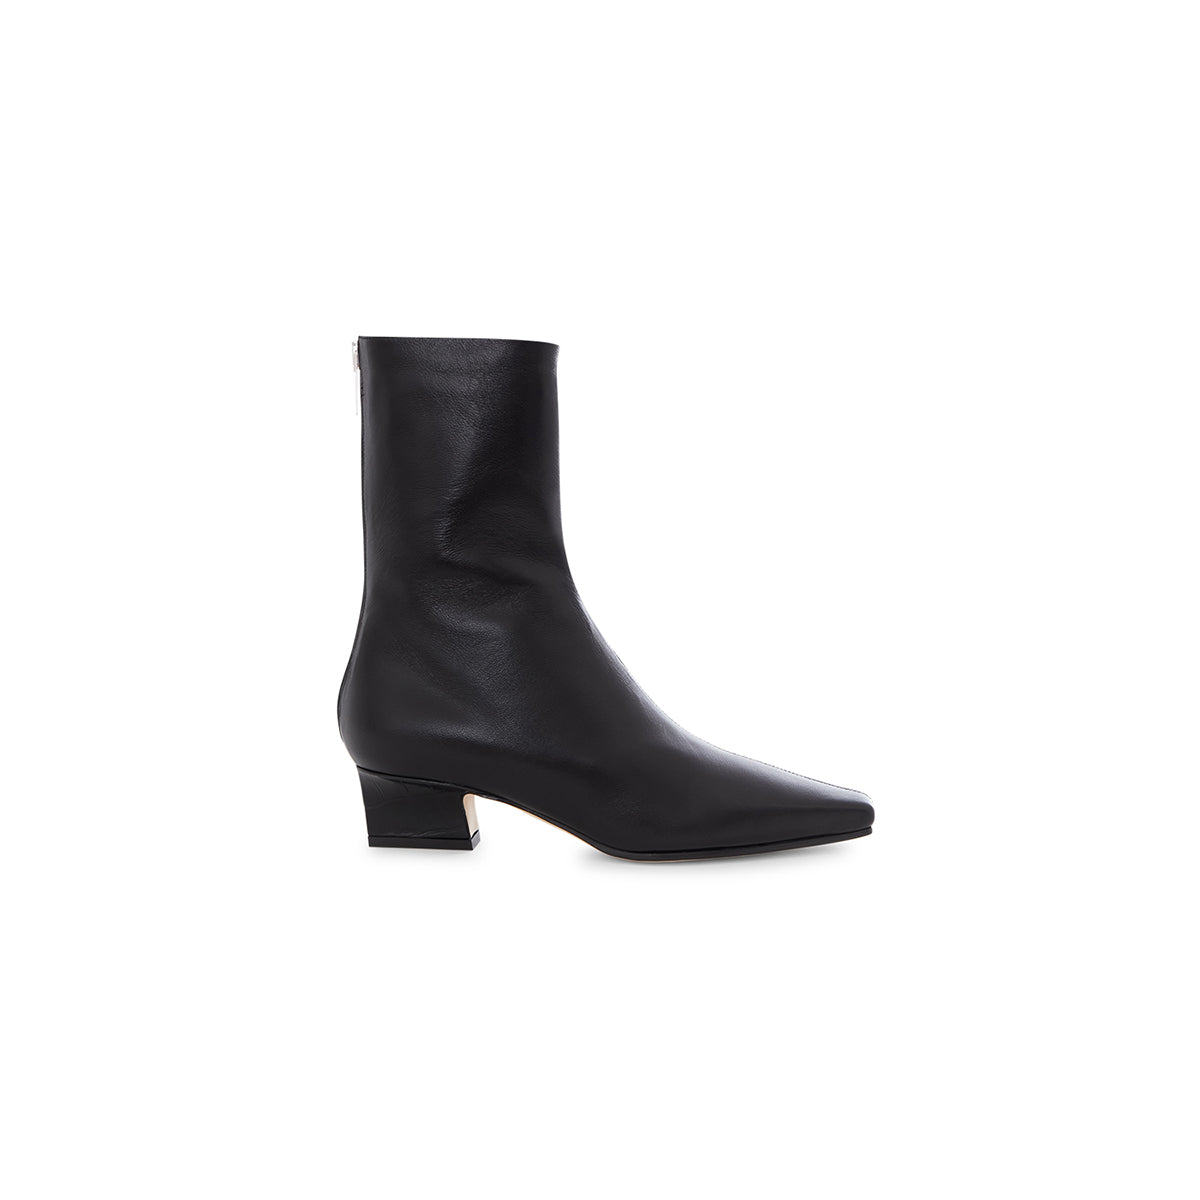 Ankle boot in black calf